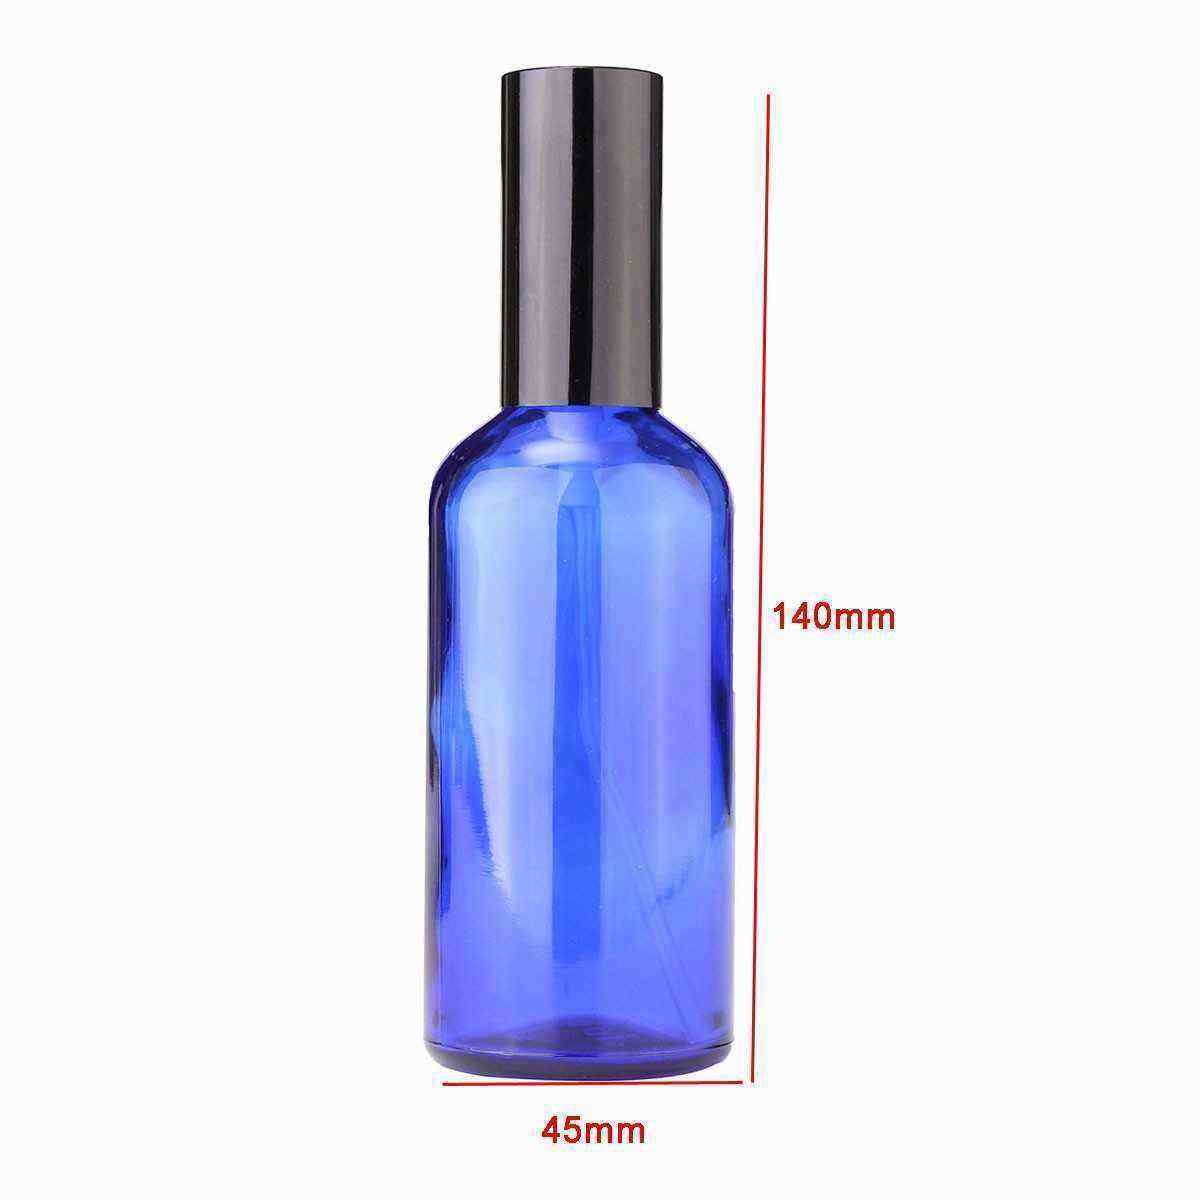 100ml-Refillable-Blue-Glass-Spray-Bottle-Perfume-Essential-Oils-with-DropperPipetteAtomiser-Cap-1126884